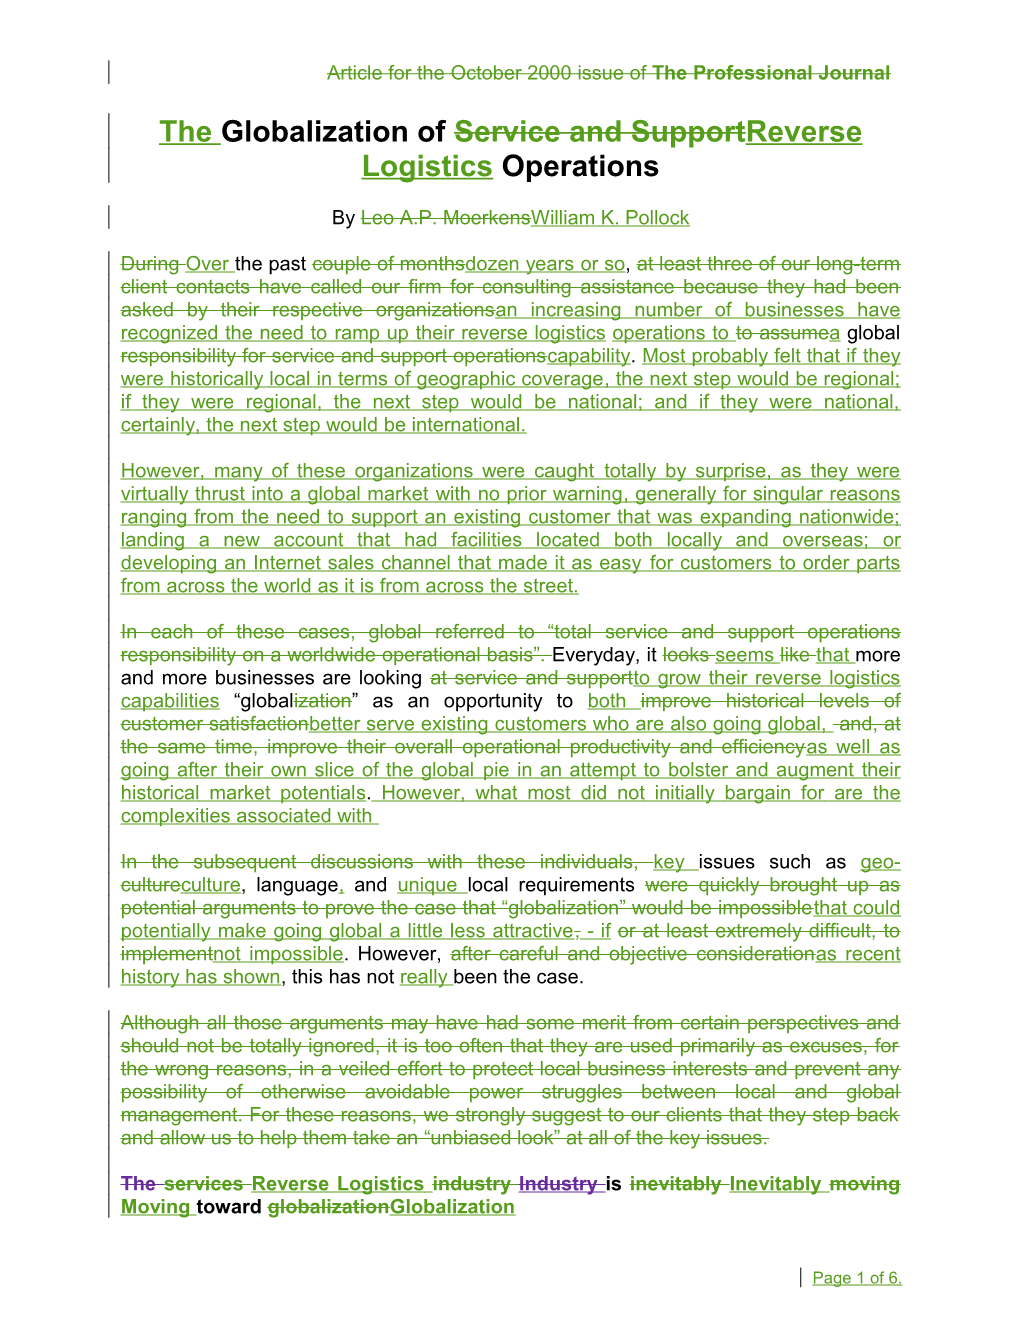 The Globalization of Reverse Logistics Operations